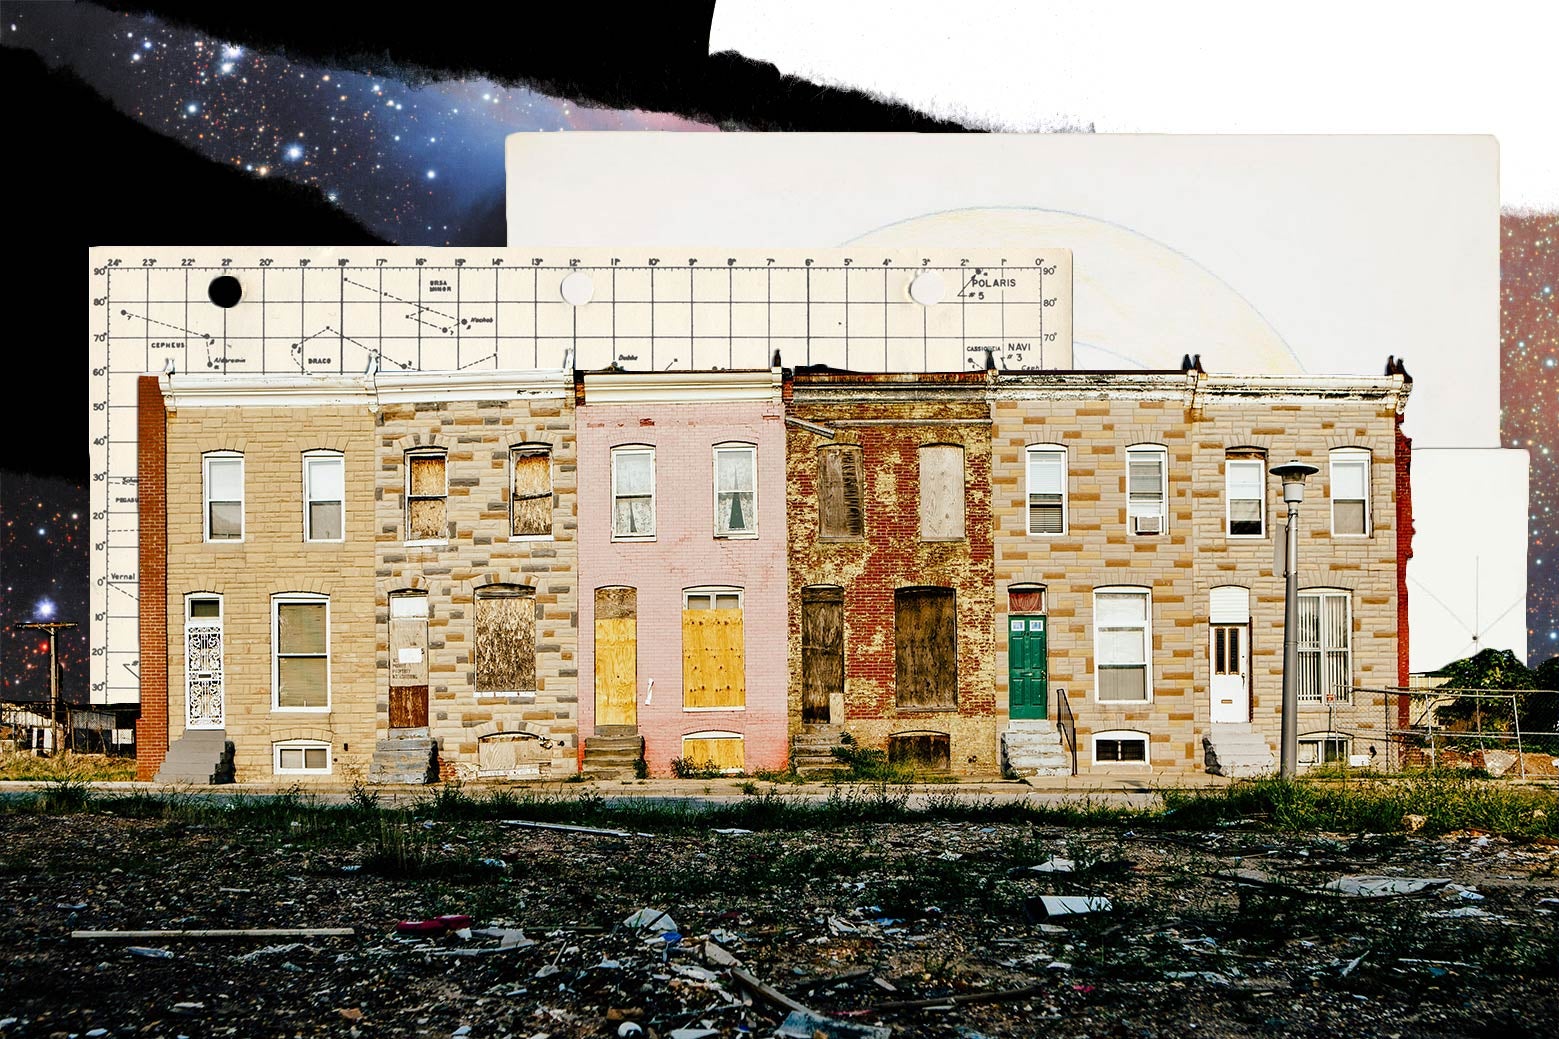 Photo illustration: Vacant houses in Baltimore with astronomical charts and photos of stars collaged behind.